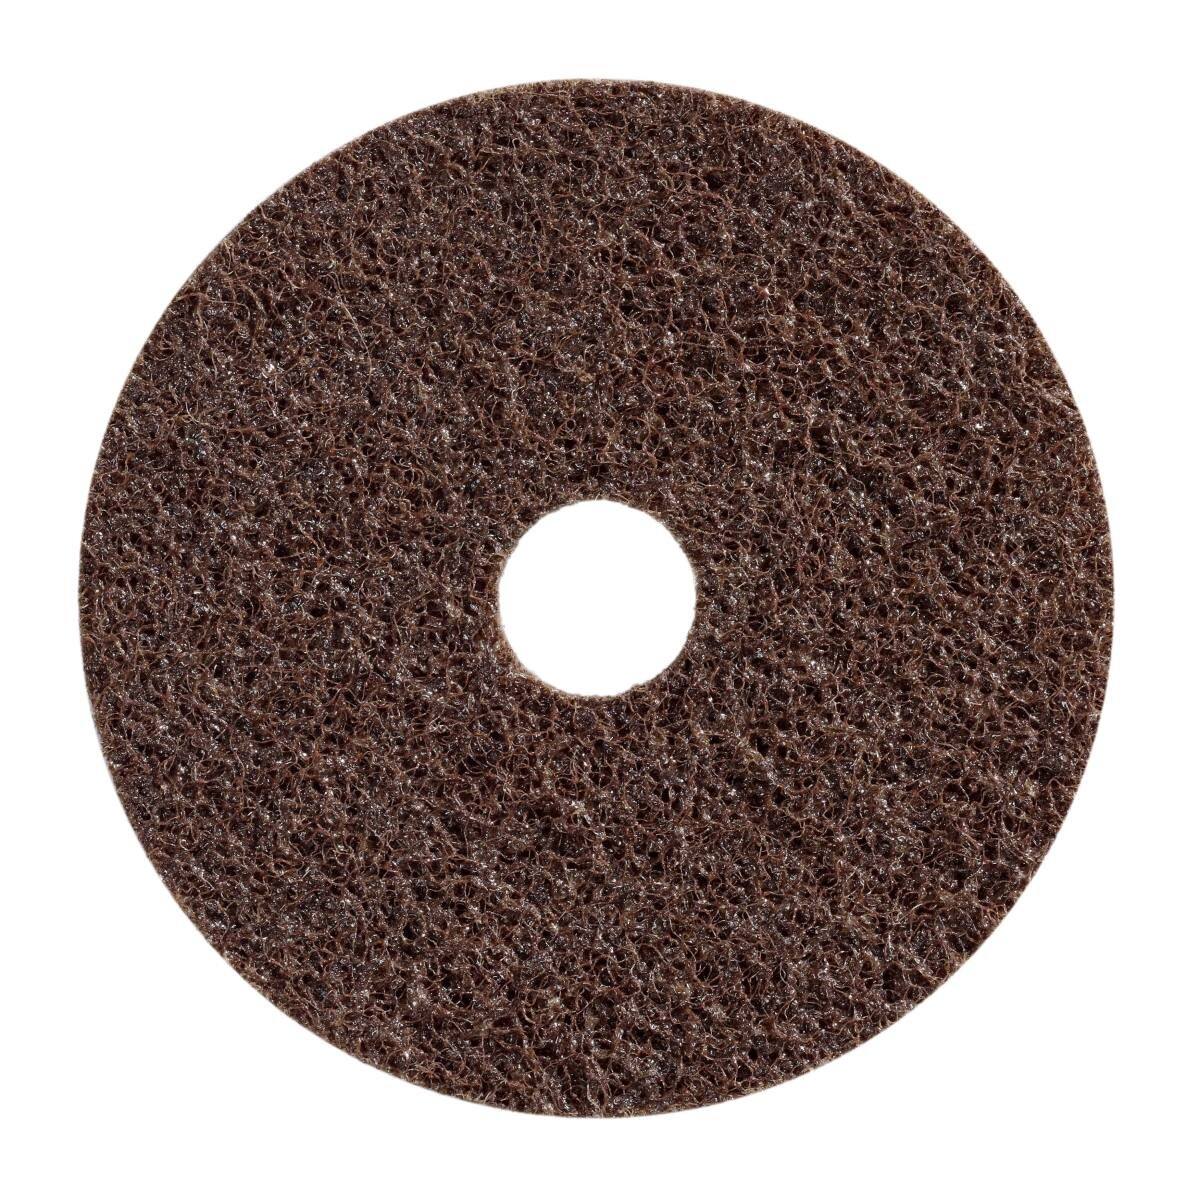 3M Scotch-Brite Non-woven disc SC-DH without centring, grey, 115 mm, S, sfn #48560